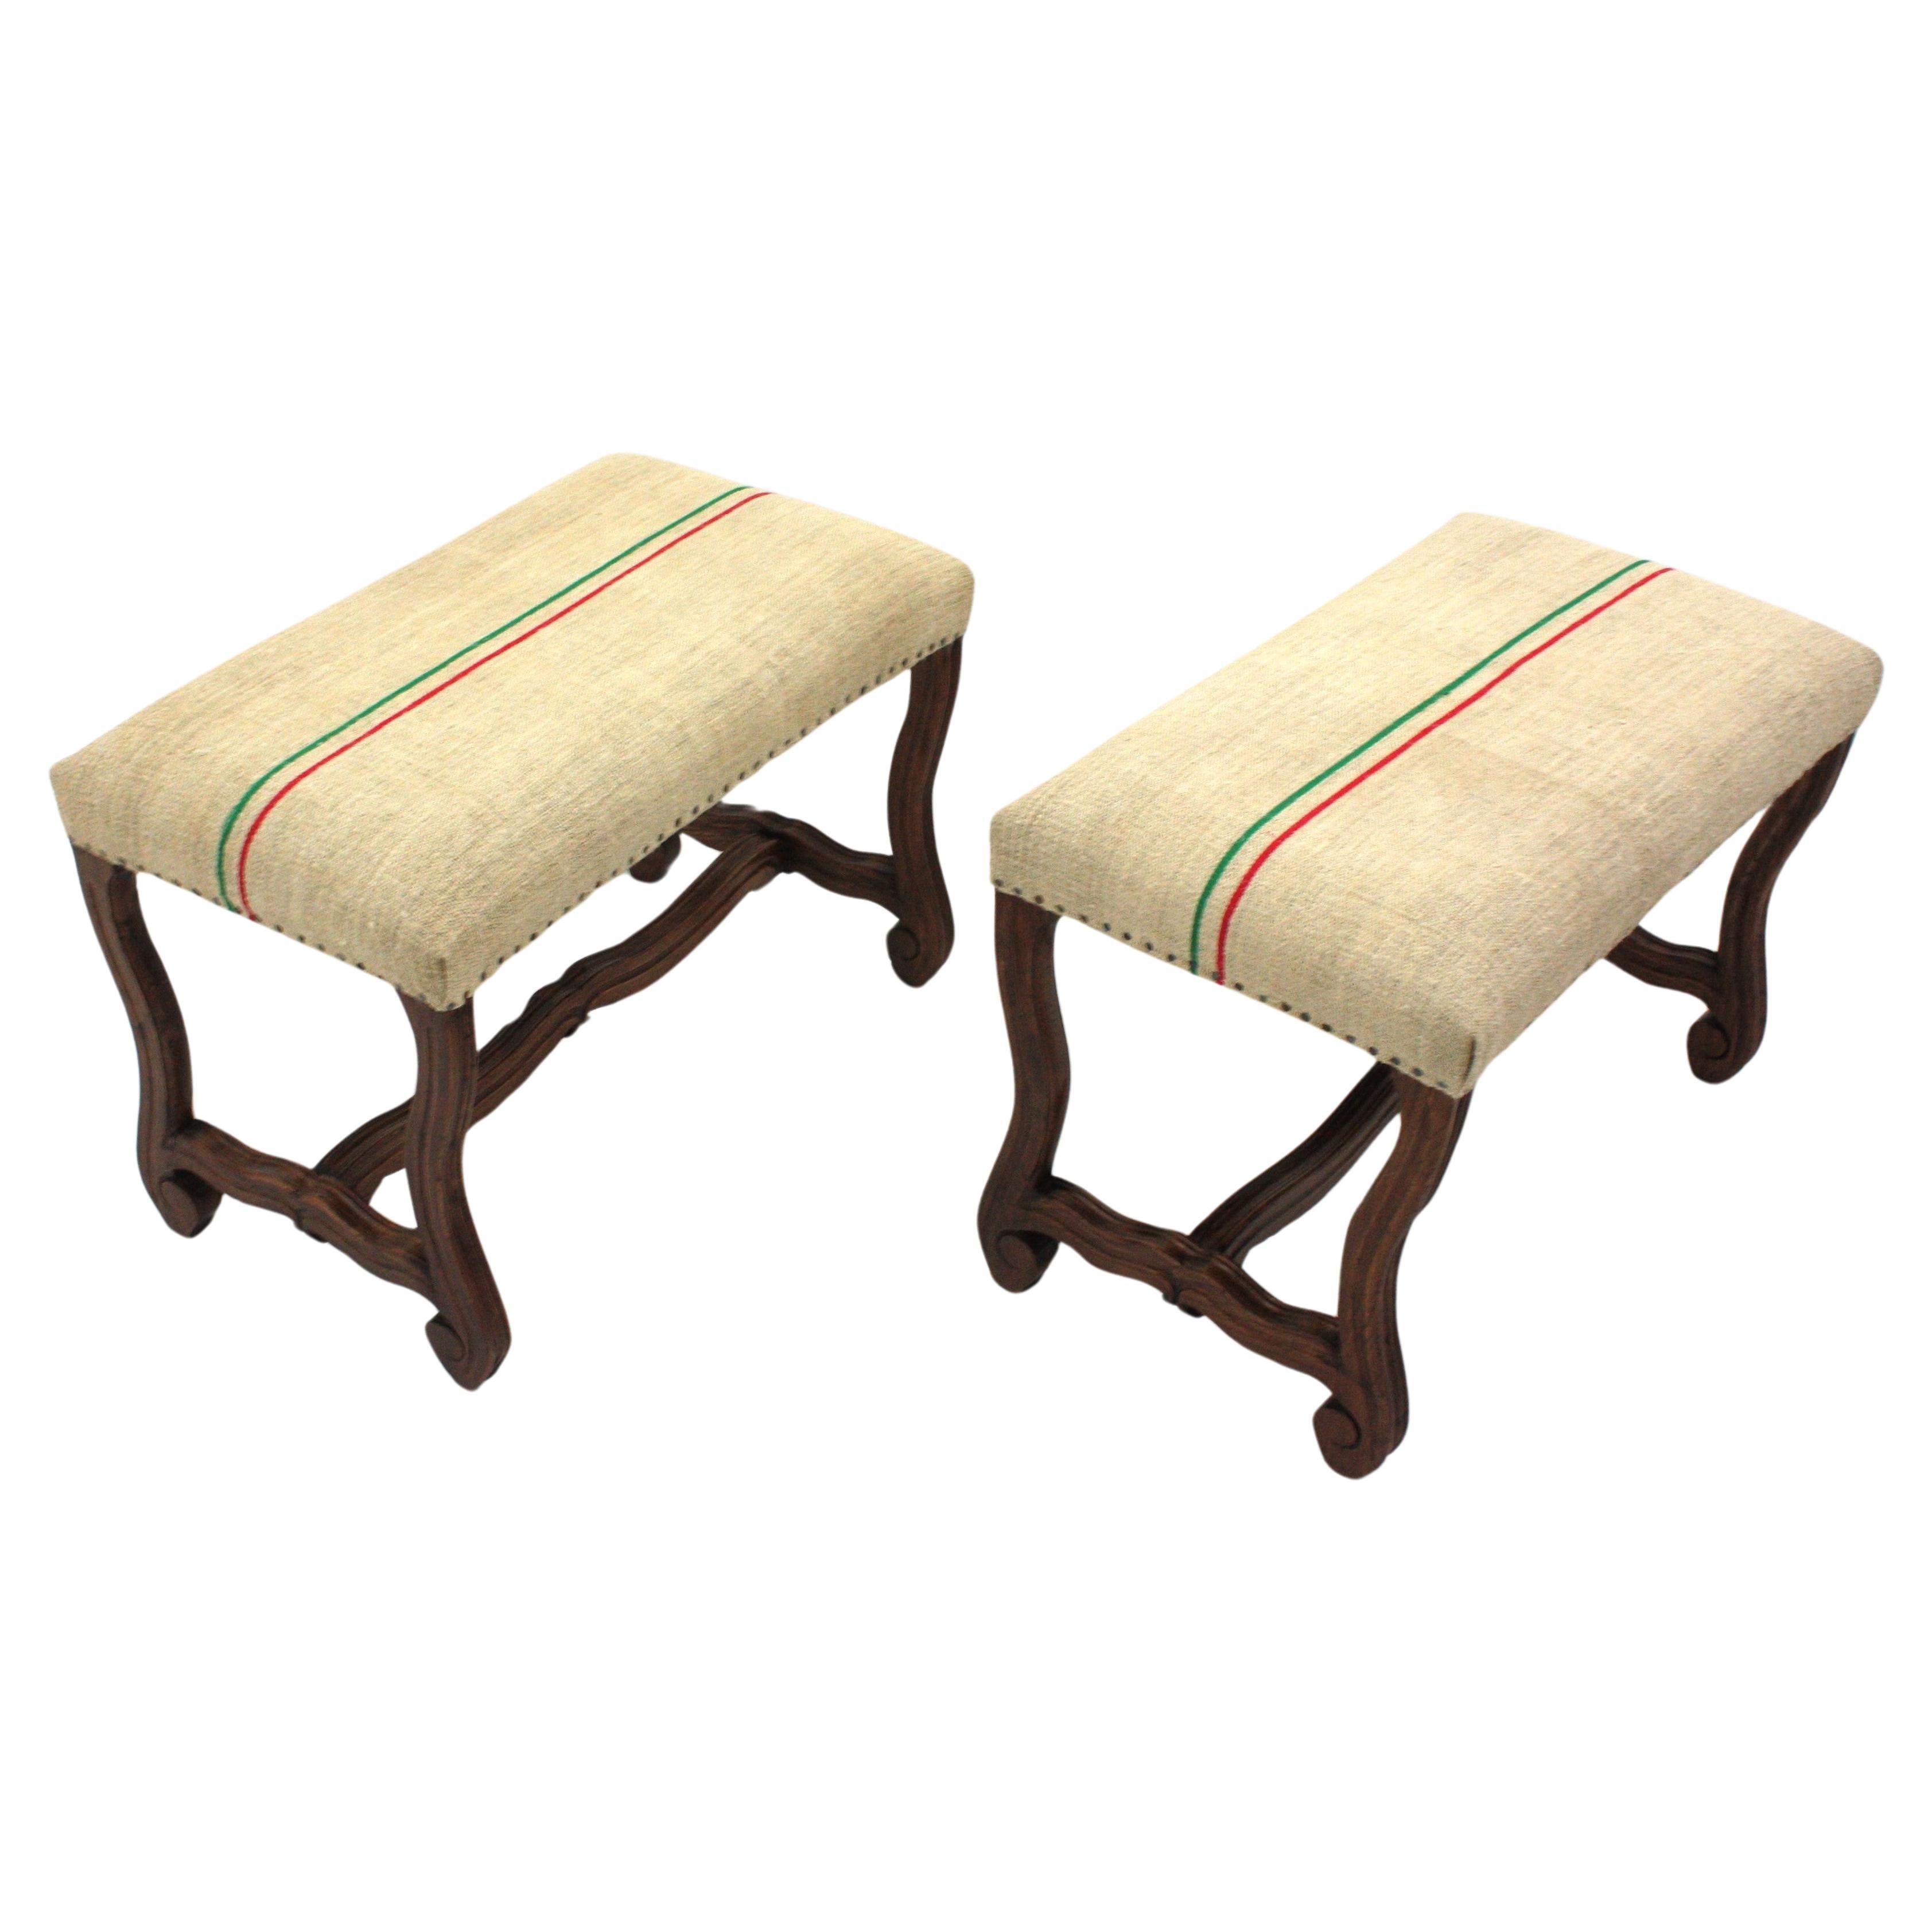 Pair of Os de Mouton Louis XIV Oak Stools New Upholstered in French Linen  For Sale 1